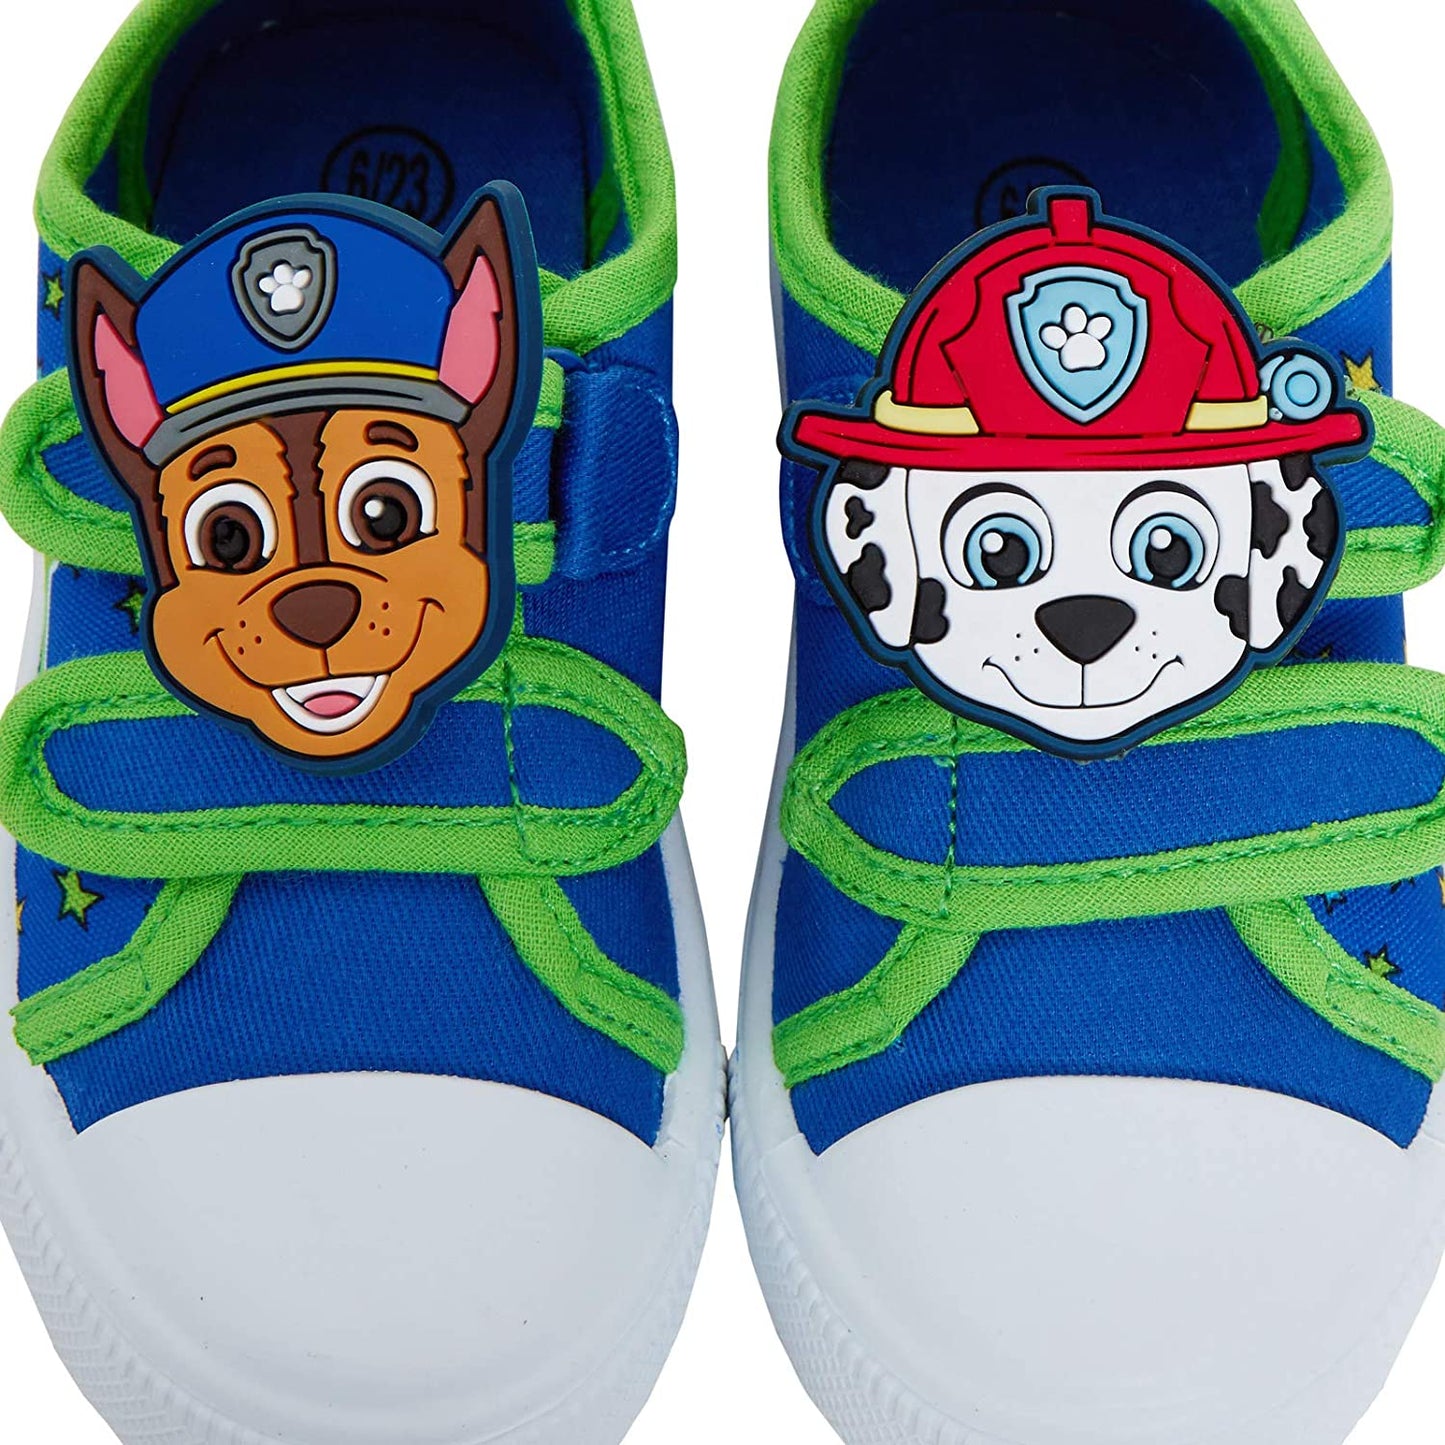 Boys Paw Patrol Canvas Shoes Trainers Sneakers